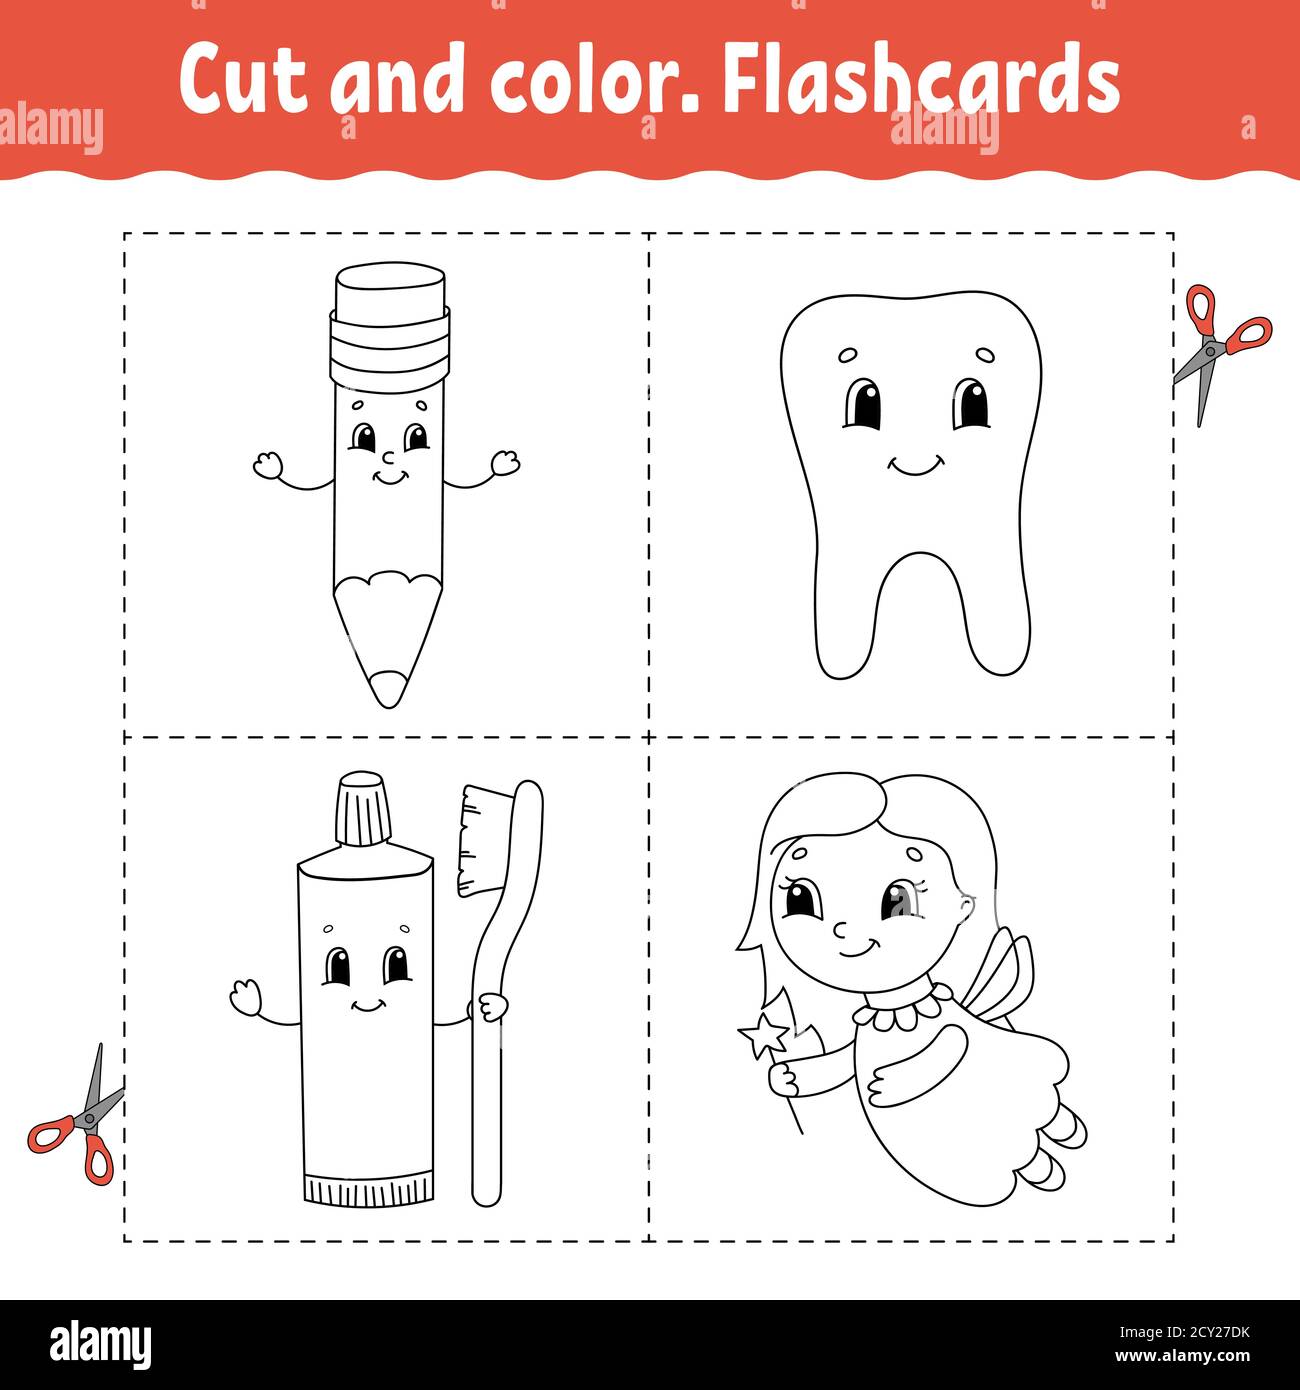 Cut and color. Flashcard Set. Coloring book for kids. Cartoon character. Stock Vector